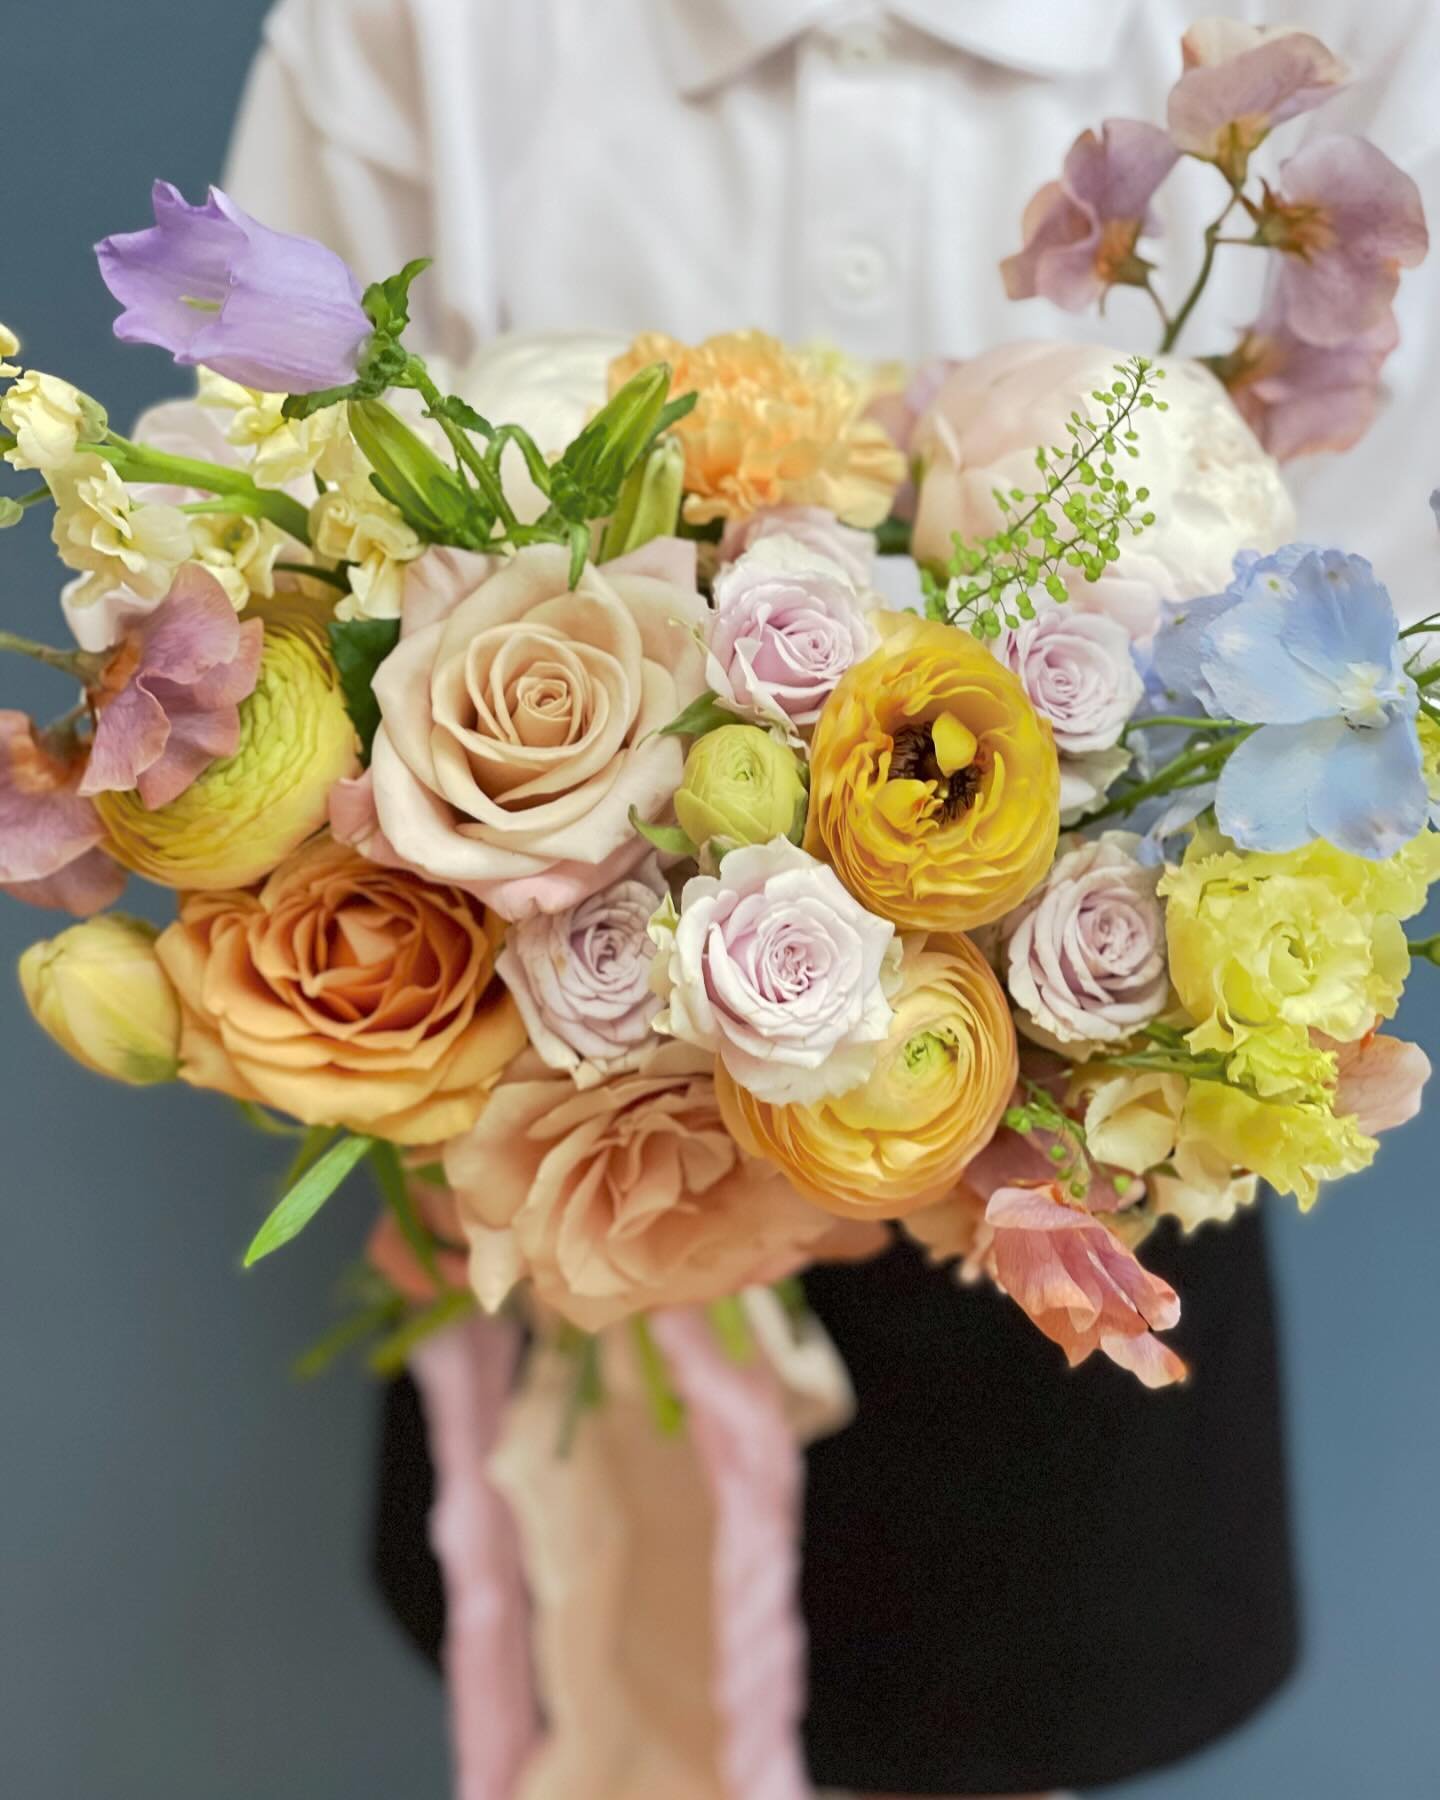 Kay&rsquo;s beautiful bank holiday bridal bouquet ~ she and Luke get married today in Stoke Newington and I hope they have the perfect day 💛 💜 🧡 

Blousy bouquet filled with all the spring faves; sweet peas, ranunculus, peonies, tulips, stocks and